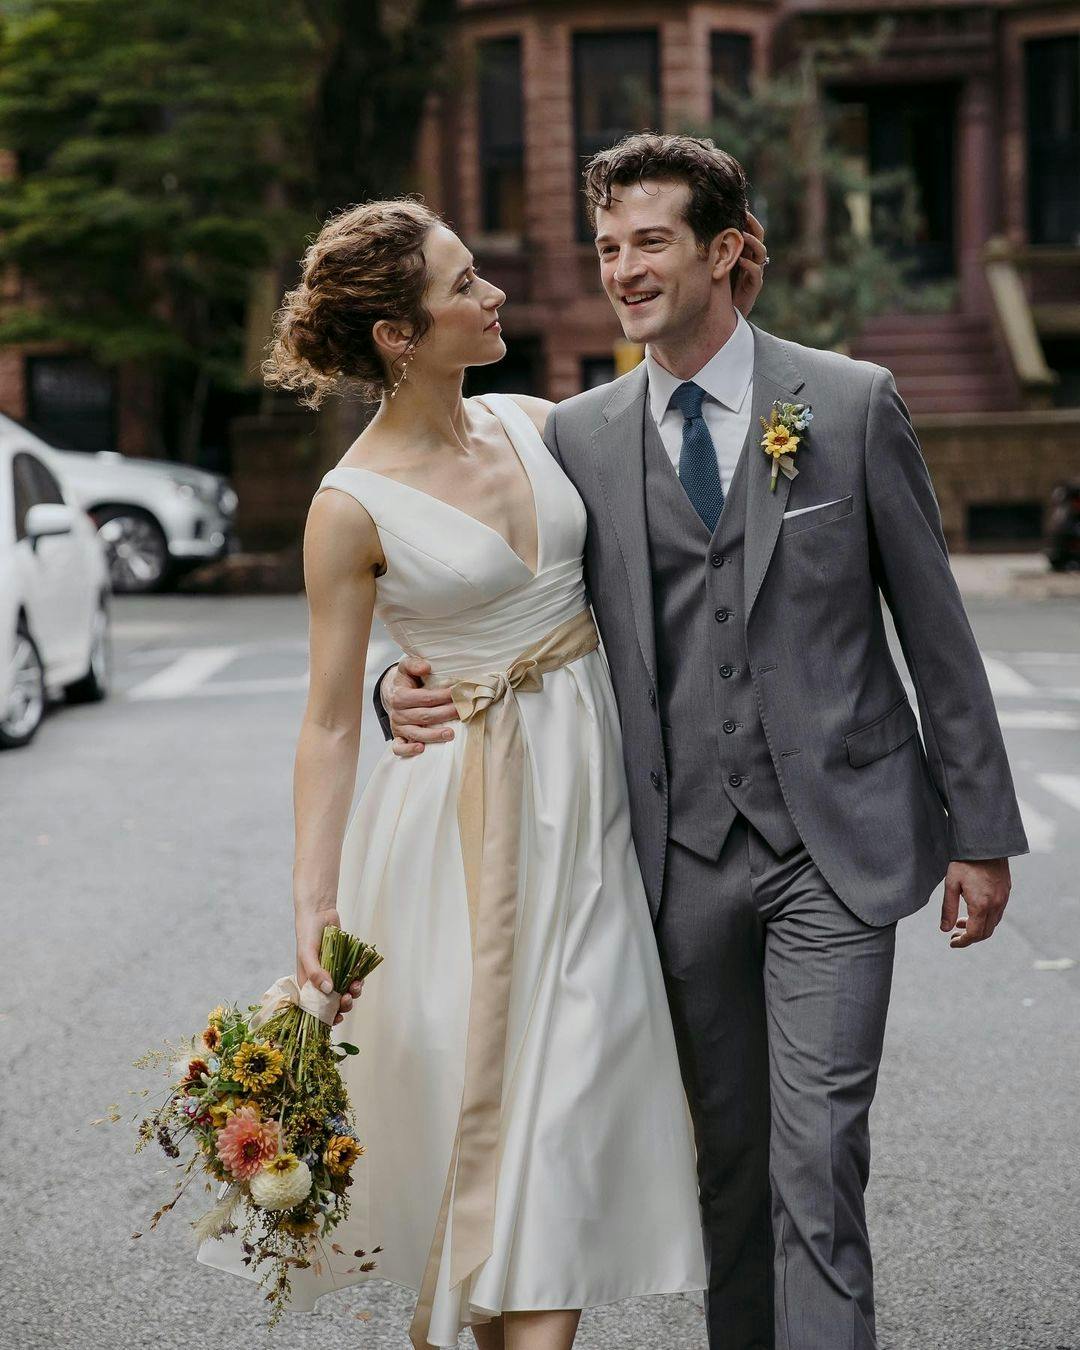 Brooklyn wedding with vintage bride style in midi wedding gown holding wildflower bouquet and groom in a light grey 3 piece suit with a sunflower boutonnière.